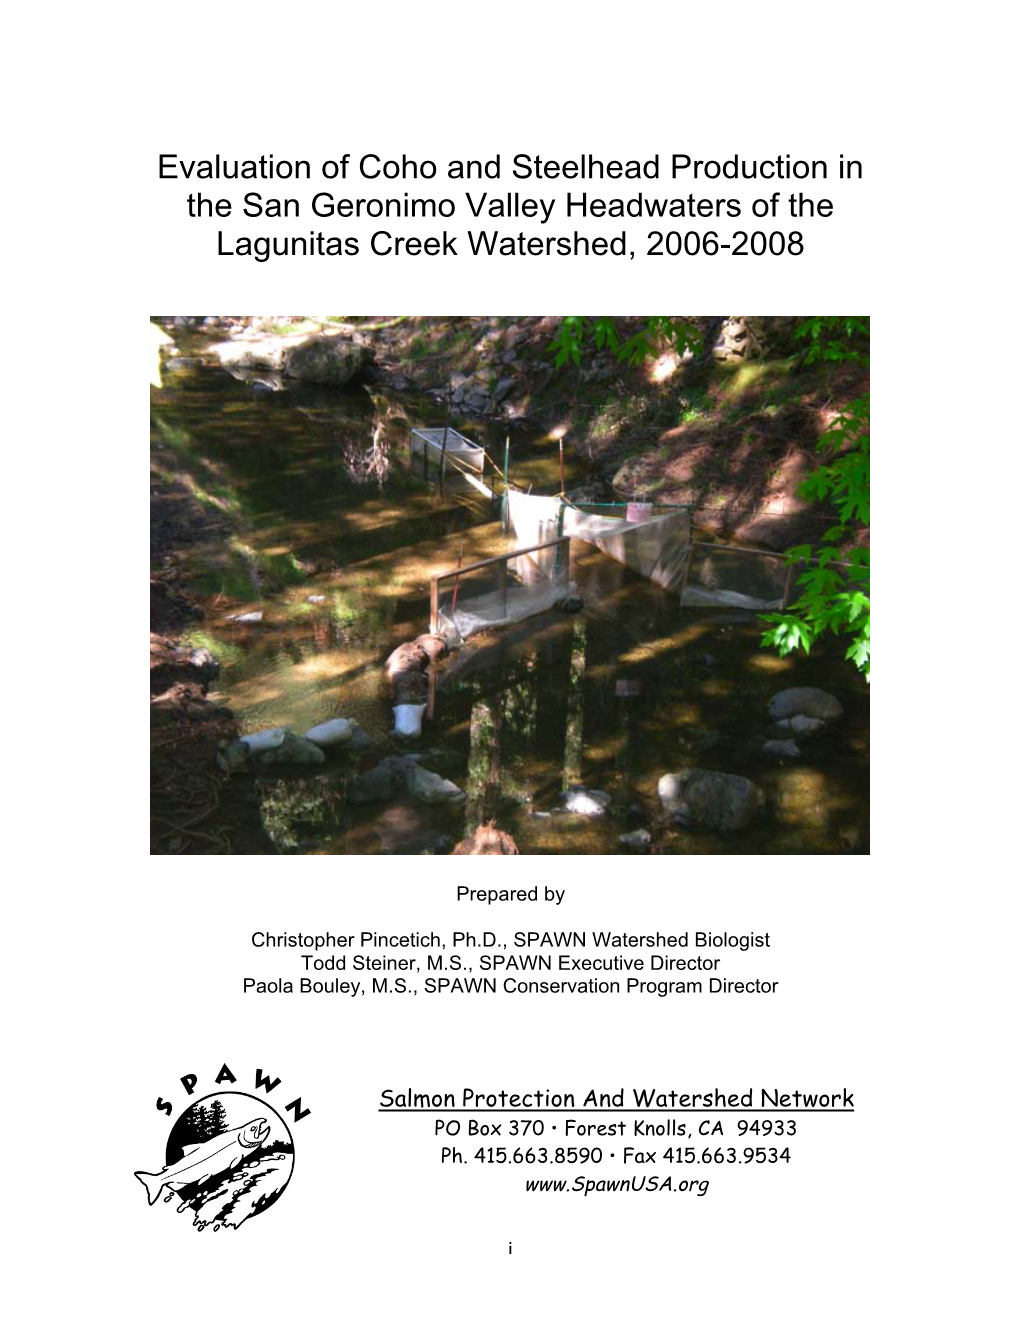 Evaluation of Coho and Steelhead Production in the San Geronimo Valley Headwaters of the Lagunitas Creek Watershed, 2006-2008